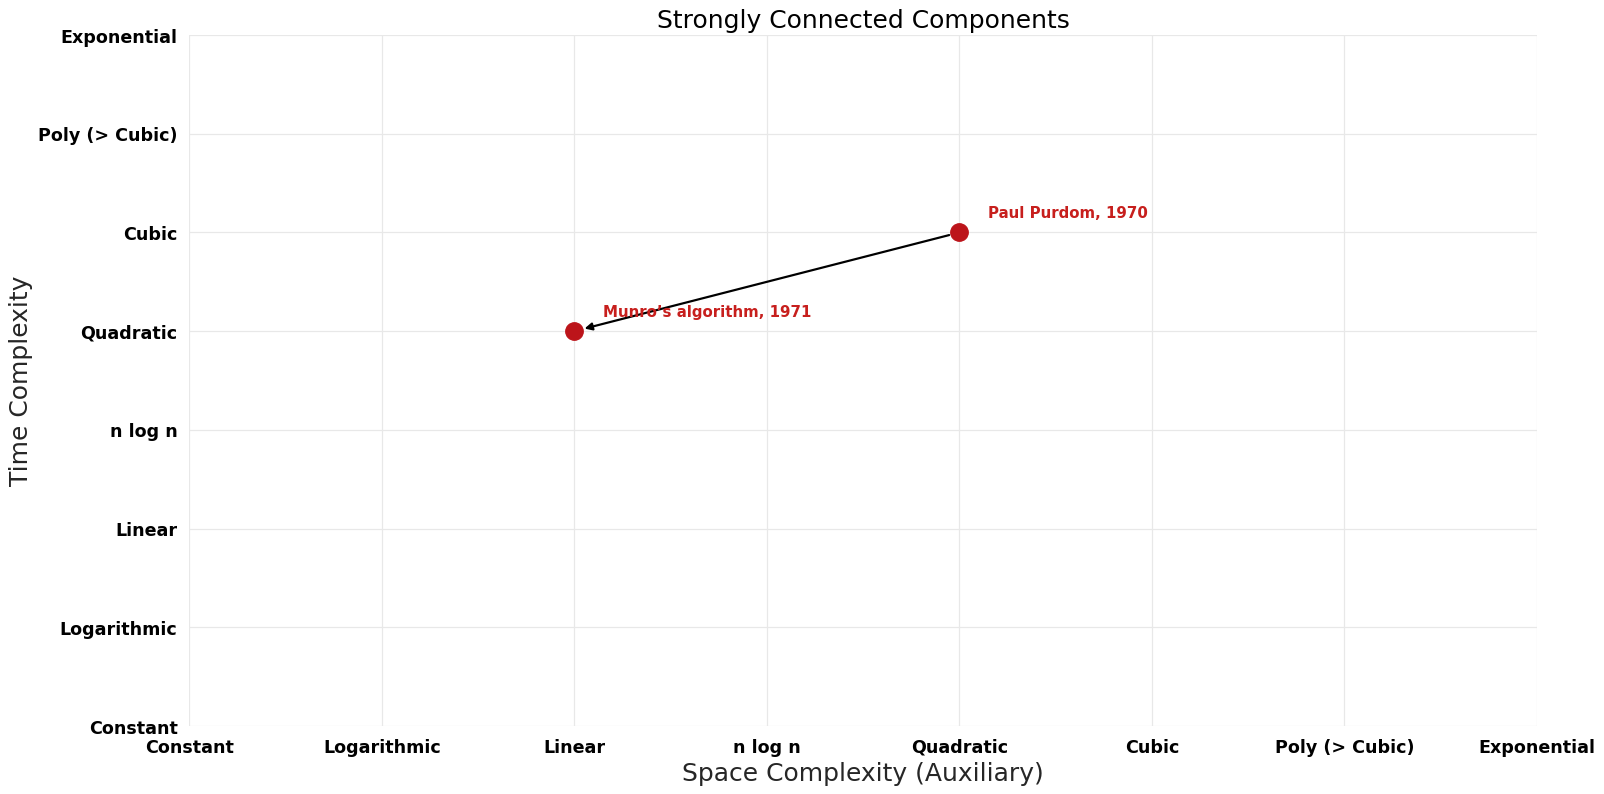 Strongly Connected Components - Pareto Frontier.png